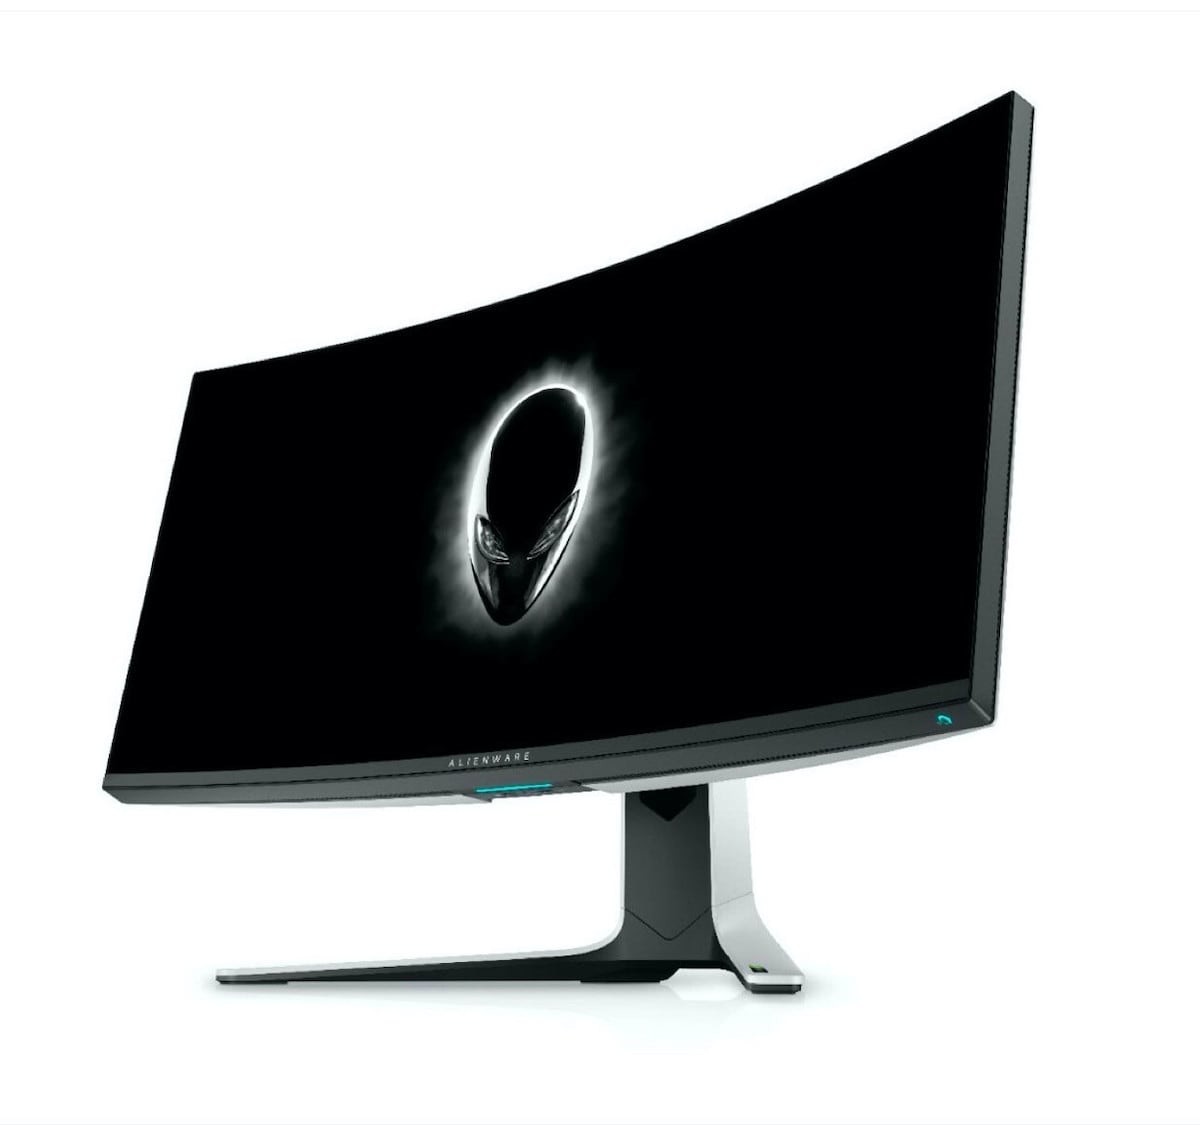 Dell Alienware 25 2020 edition gaming monitor now has a 360 Hz refresh rate